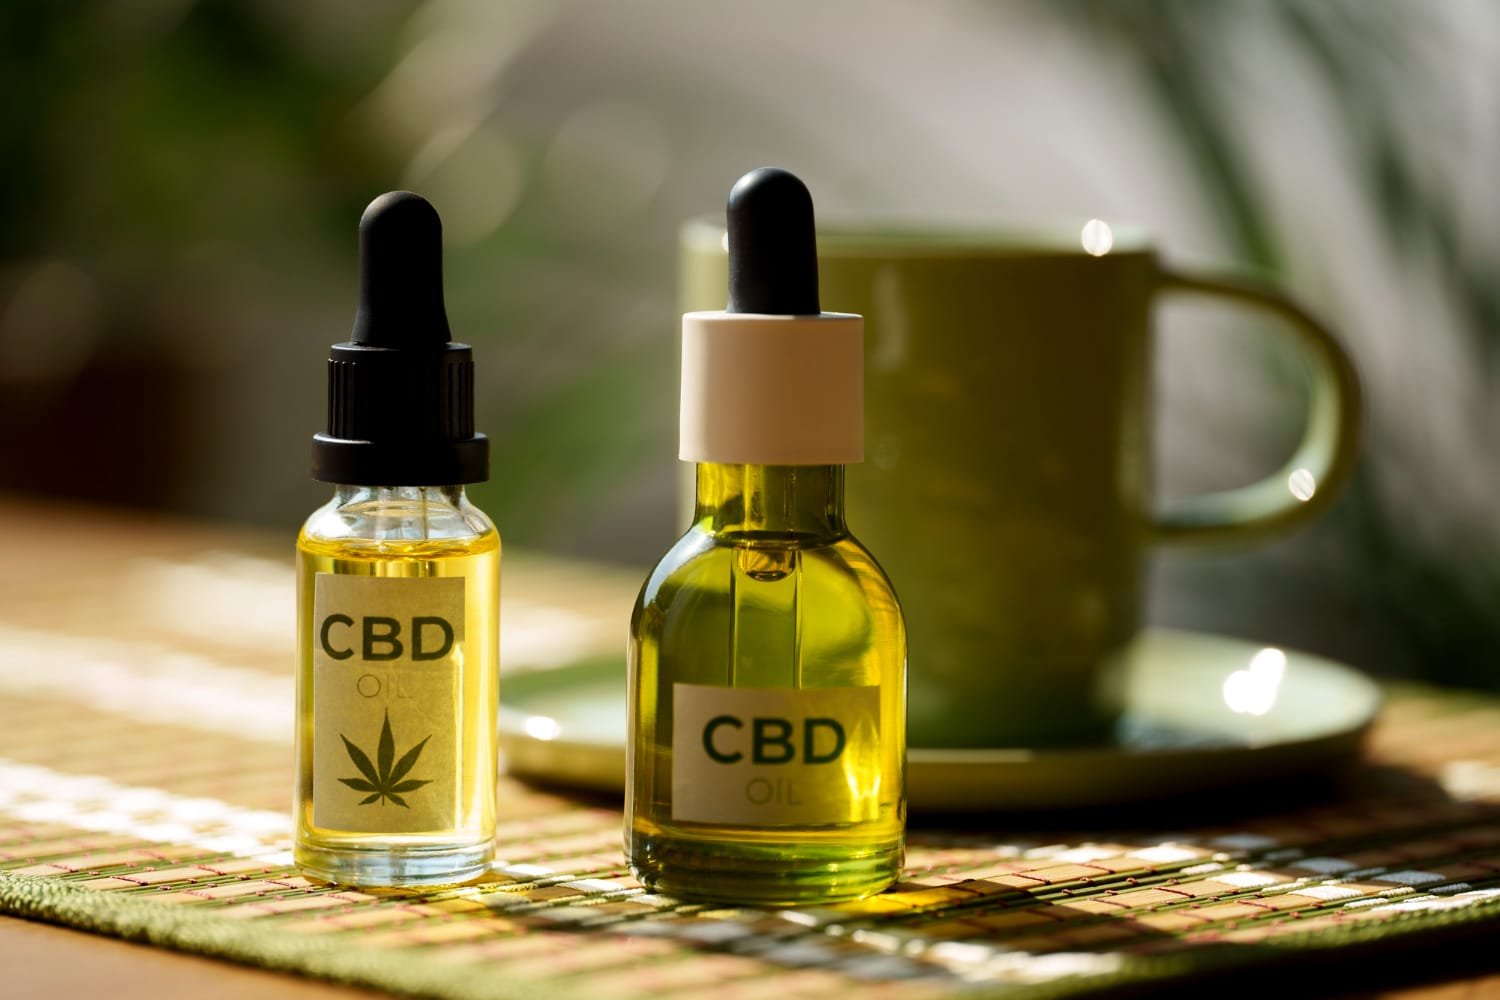 Discover the Benefits of CBD with Just CBD’s Diverse Product Line